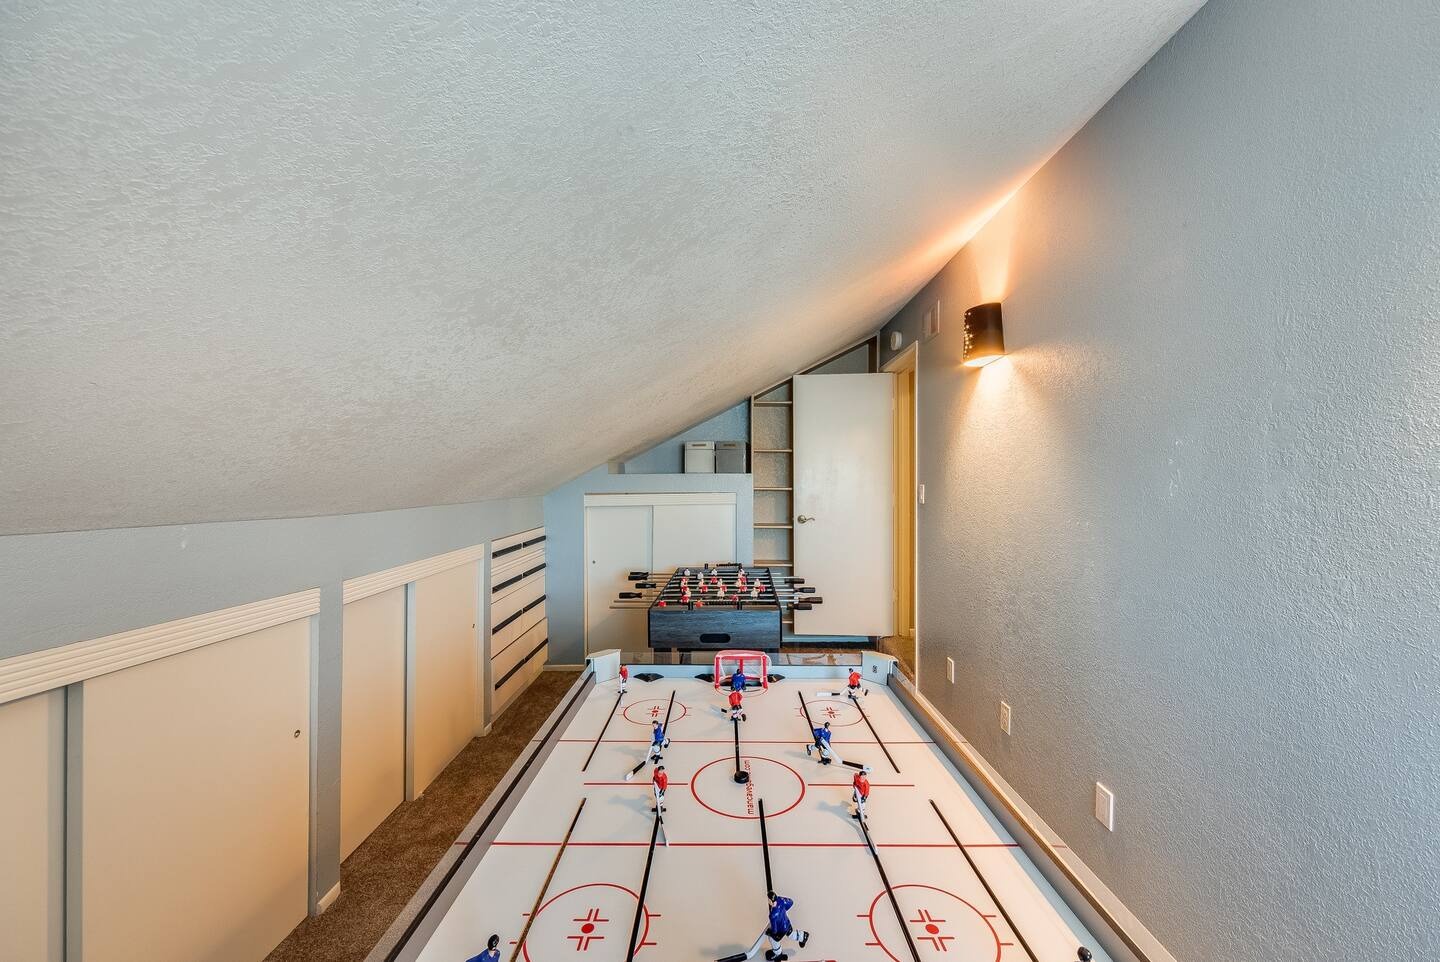 Glendale Vacation Rentals, Cahill Casa - Game room